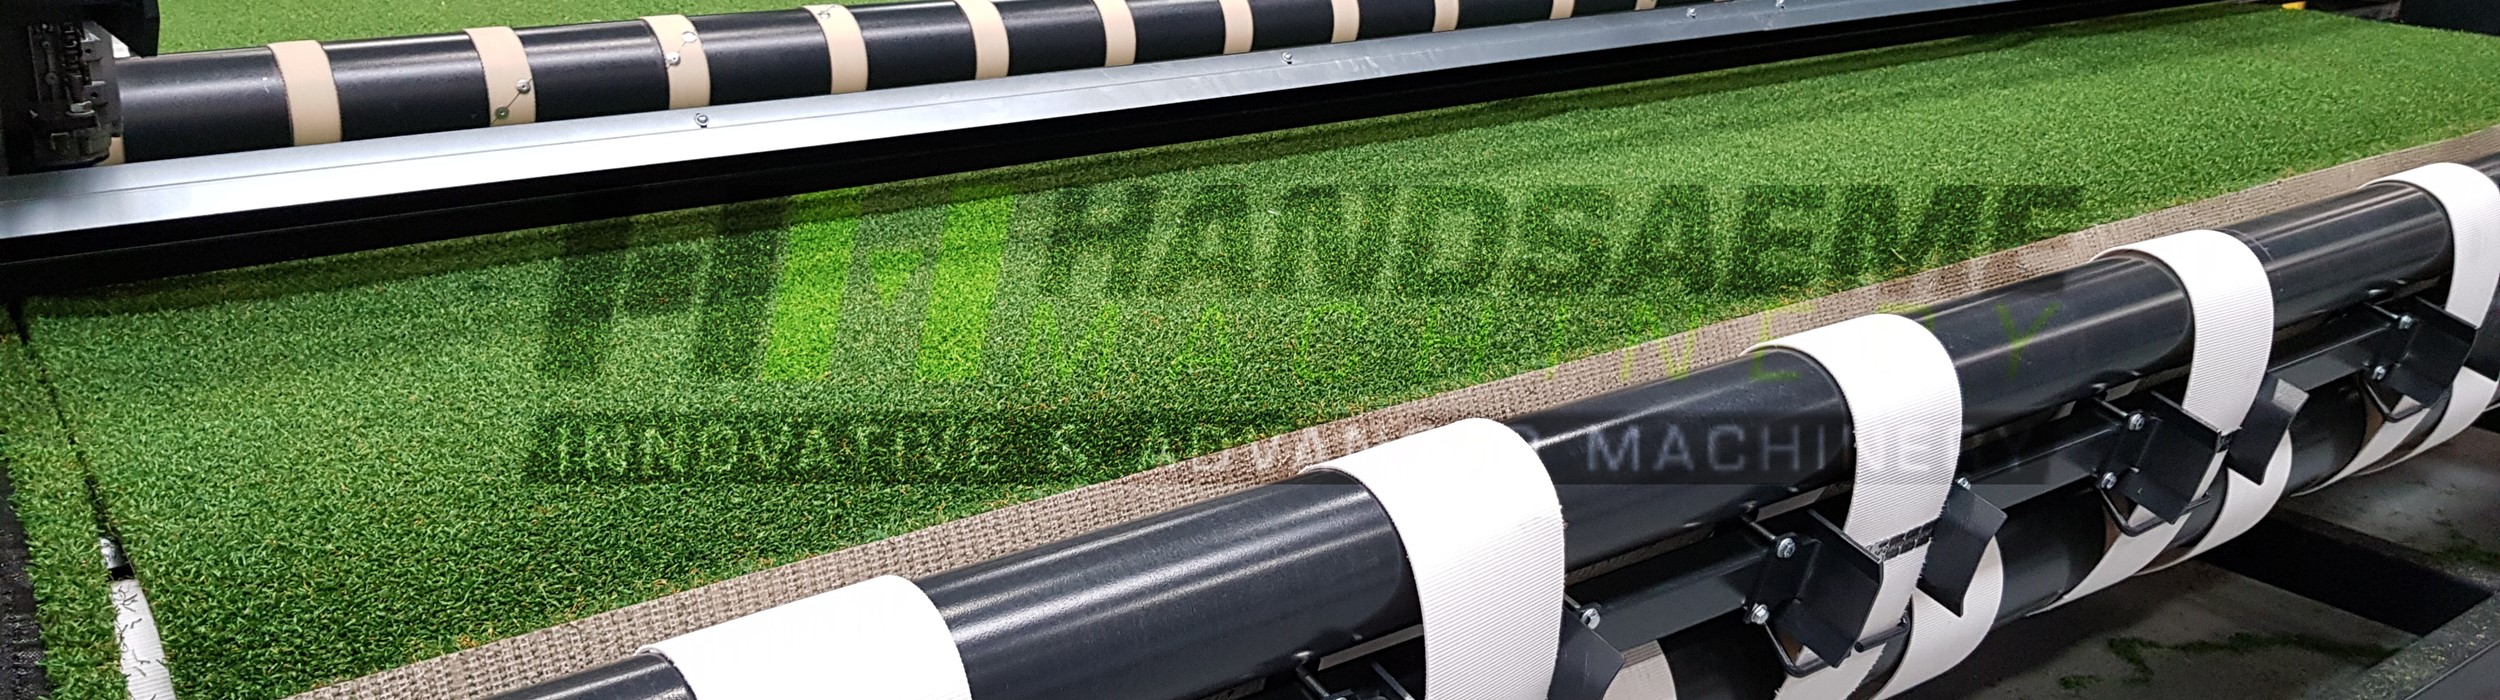 Coupon cutting machine for artificial grass